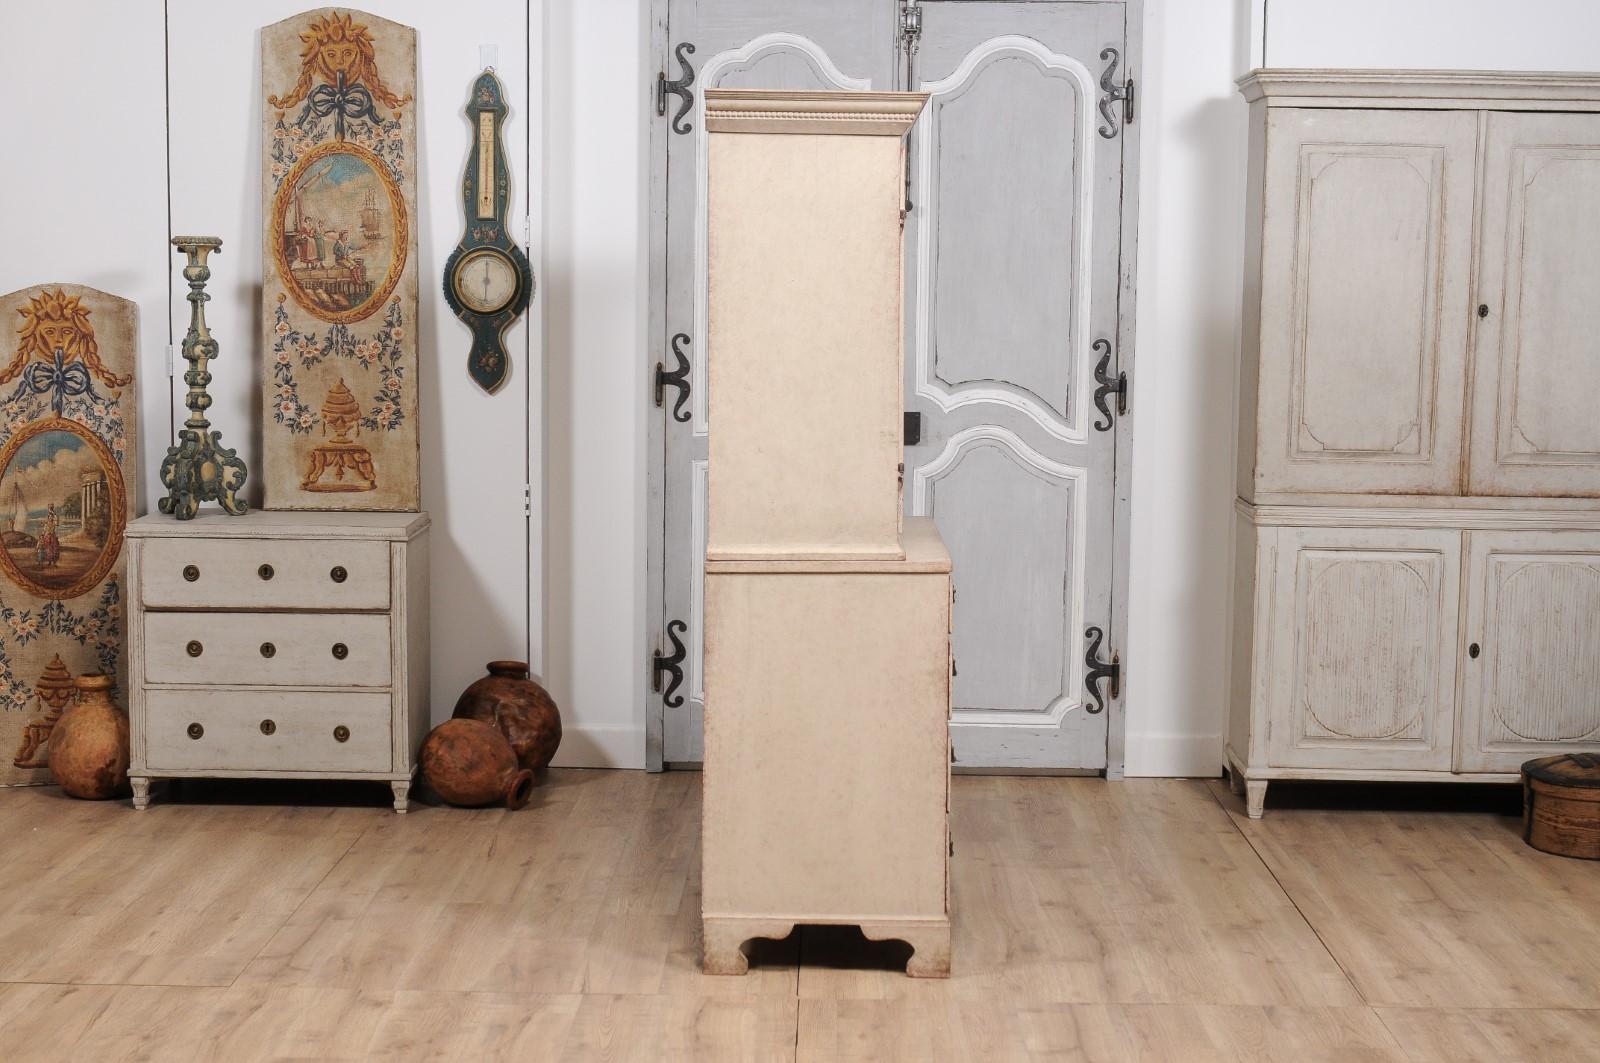 1834 Swedish Two-part Painted Cabinet with Doors and Graduated Drawers For Sale 1